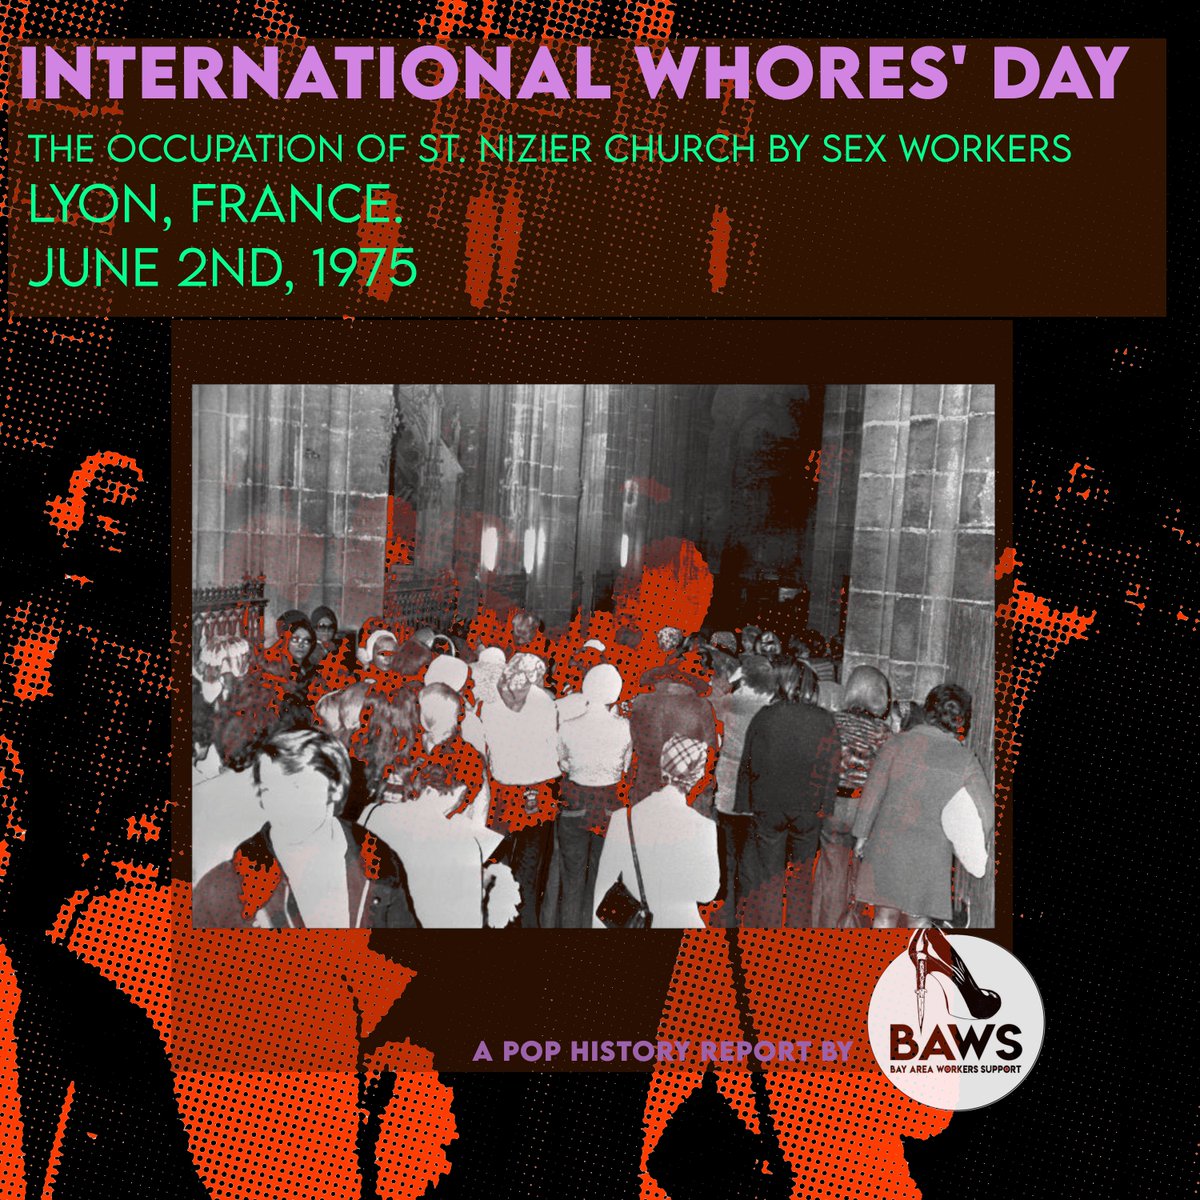 #InternationalSexWorkersDay
#InternationalSexWorkersRightsDay
#InternationalWhoresDay
#IWD2022

However you call it, it's a celebration of the action and the voices of SWers in Lyon and around the world as we continue to demand the rights and dignity we are owed.